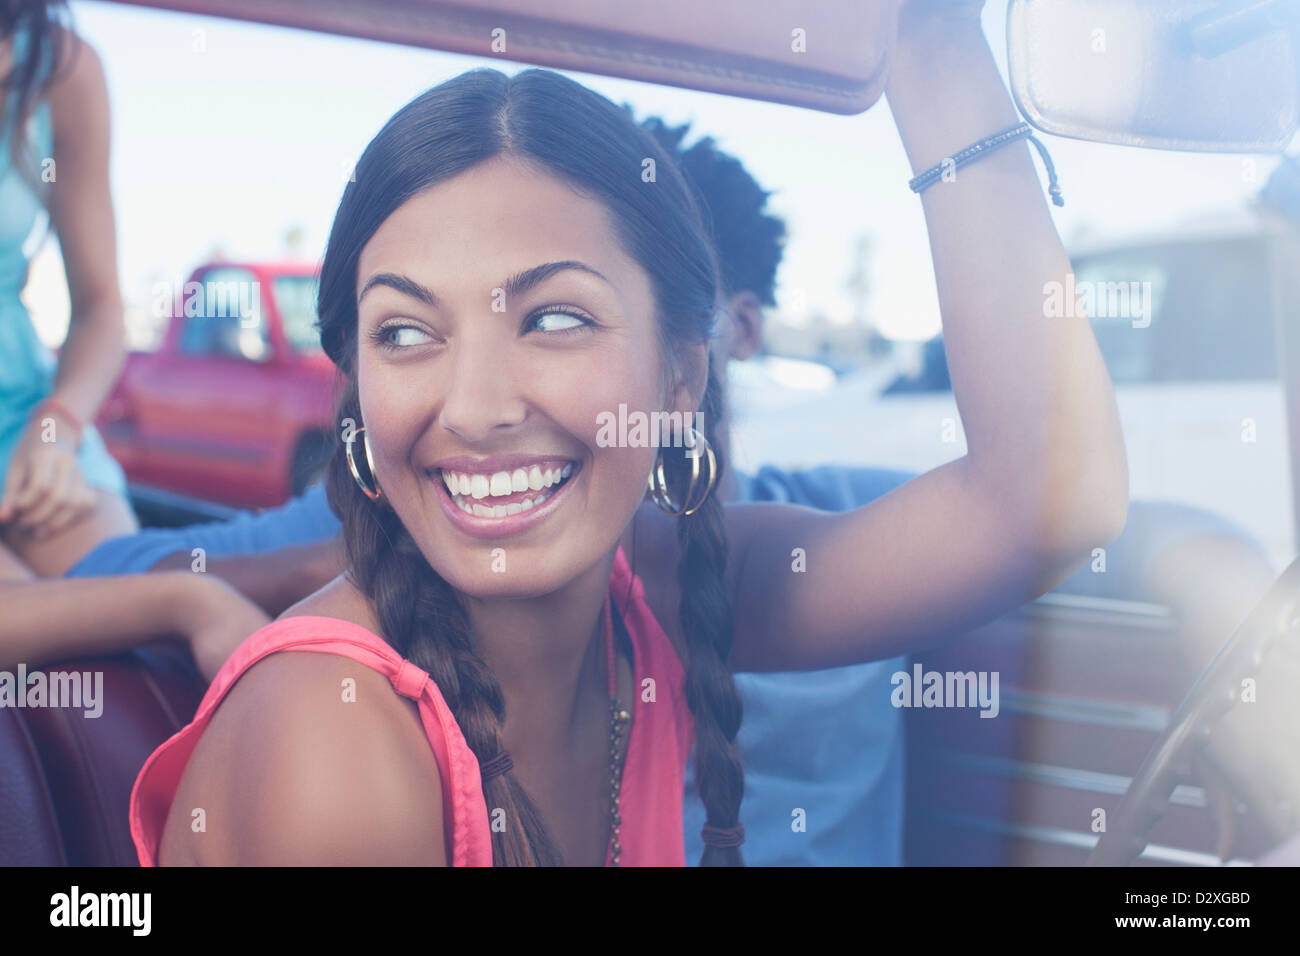 Smiling woman sitting in car Stock Photo